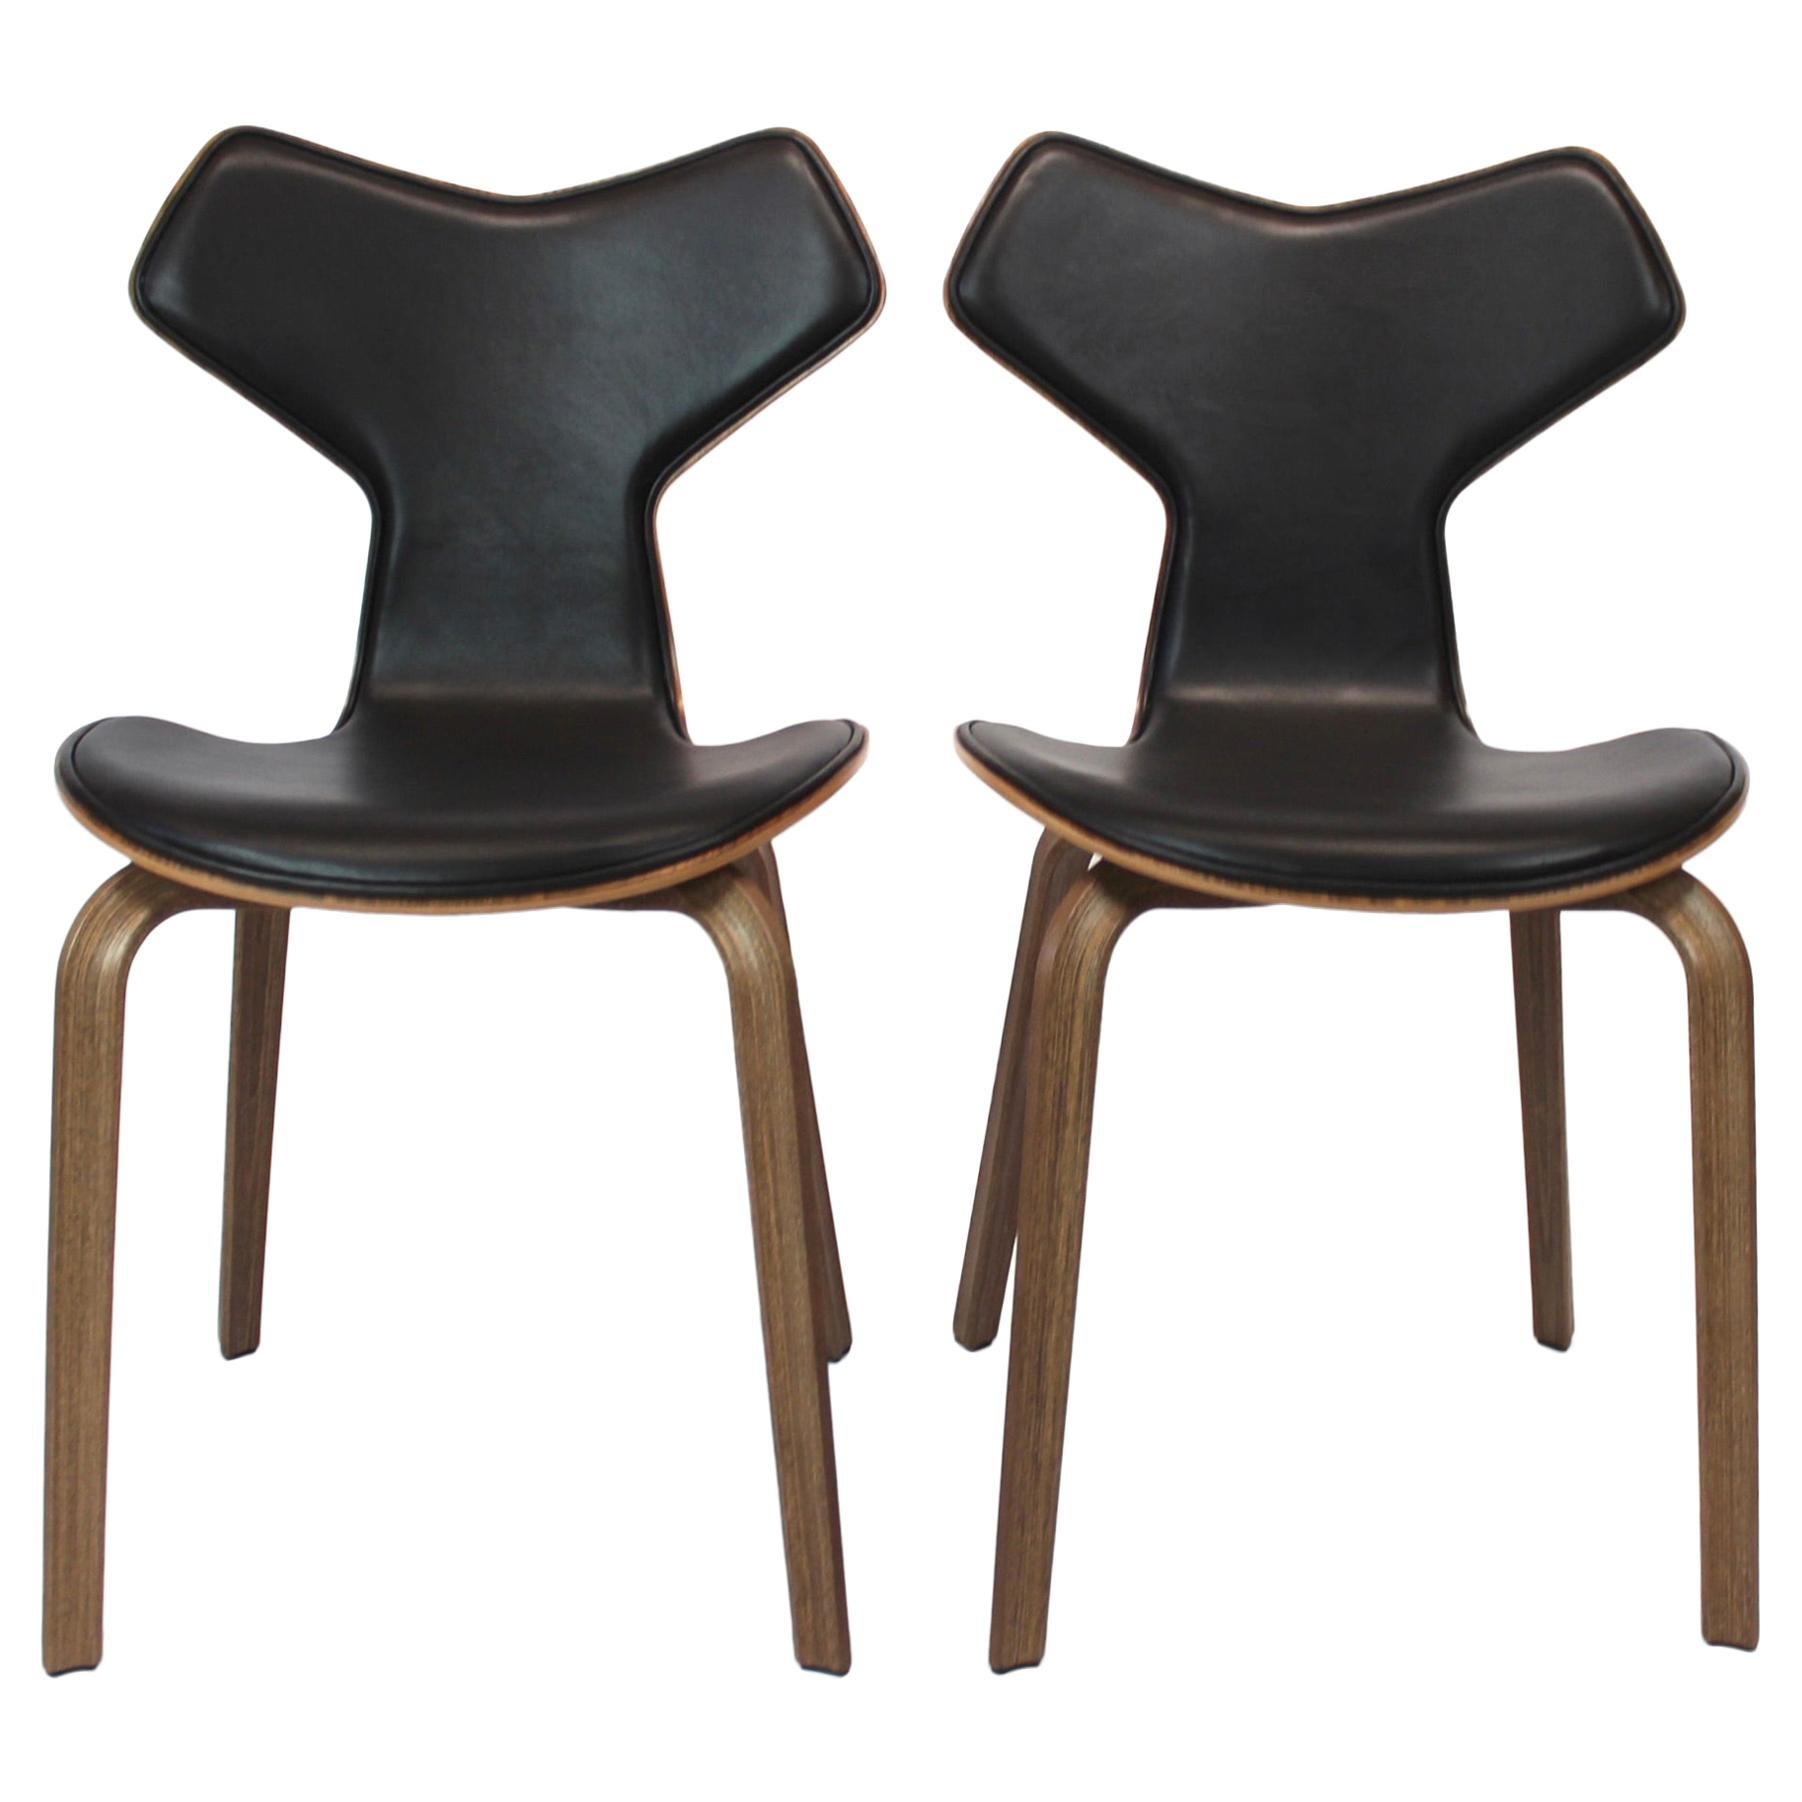 Pair of Grand Prix Chairs, Model 4130, by Arne Jacobsen and Fritz Hansen